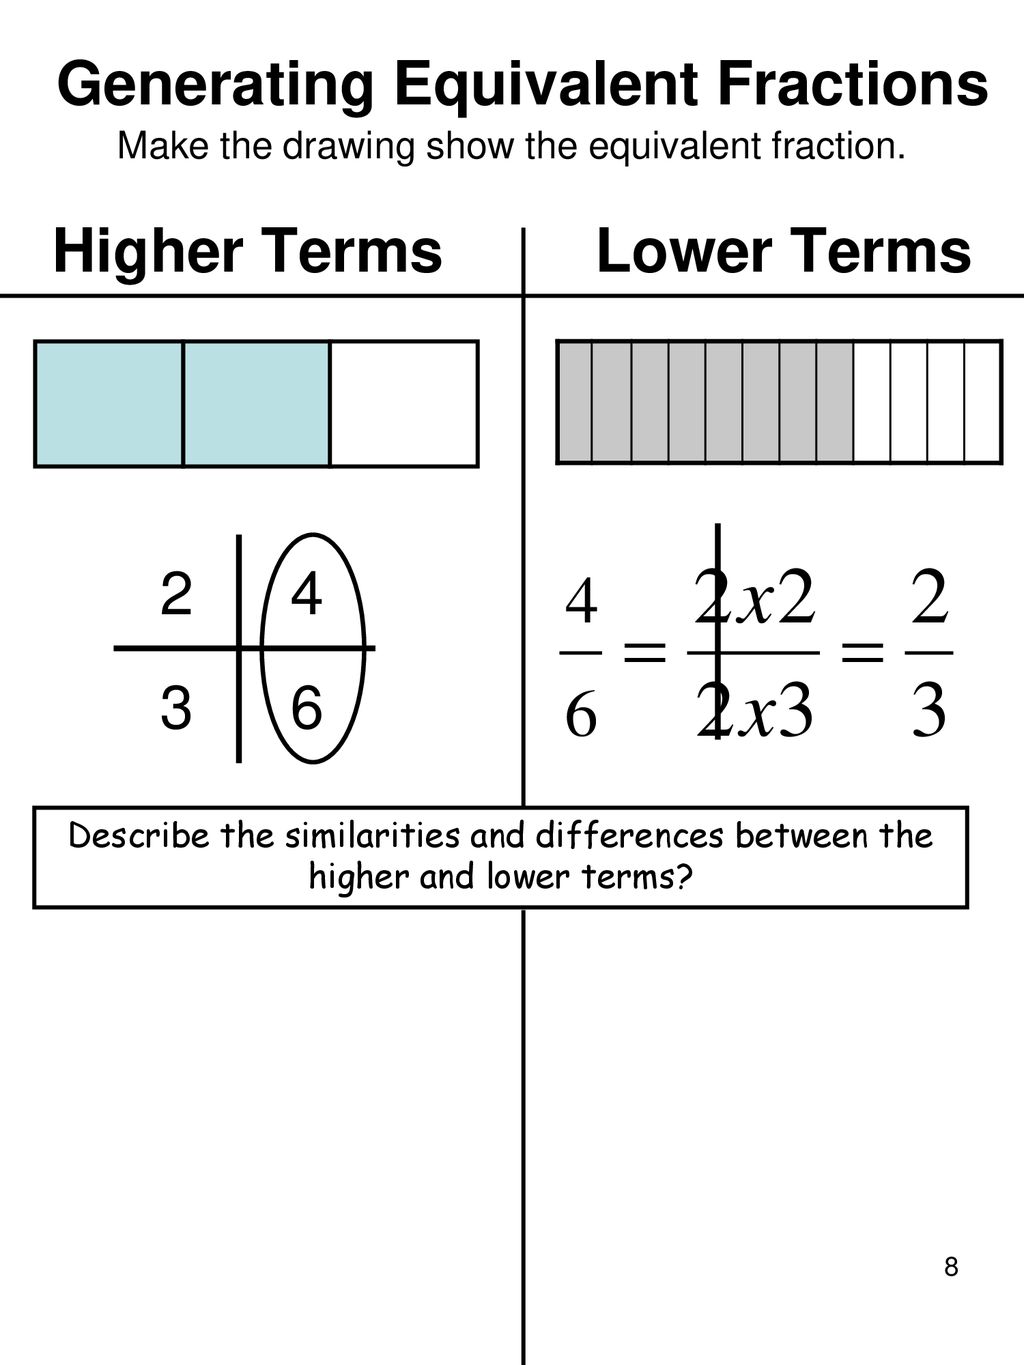 Generating Equivalent Fractions Make the drawing show the equivalent fraction. Higher Terms Lower Terms